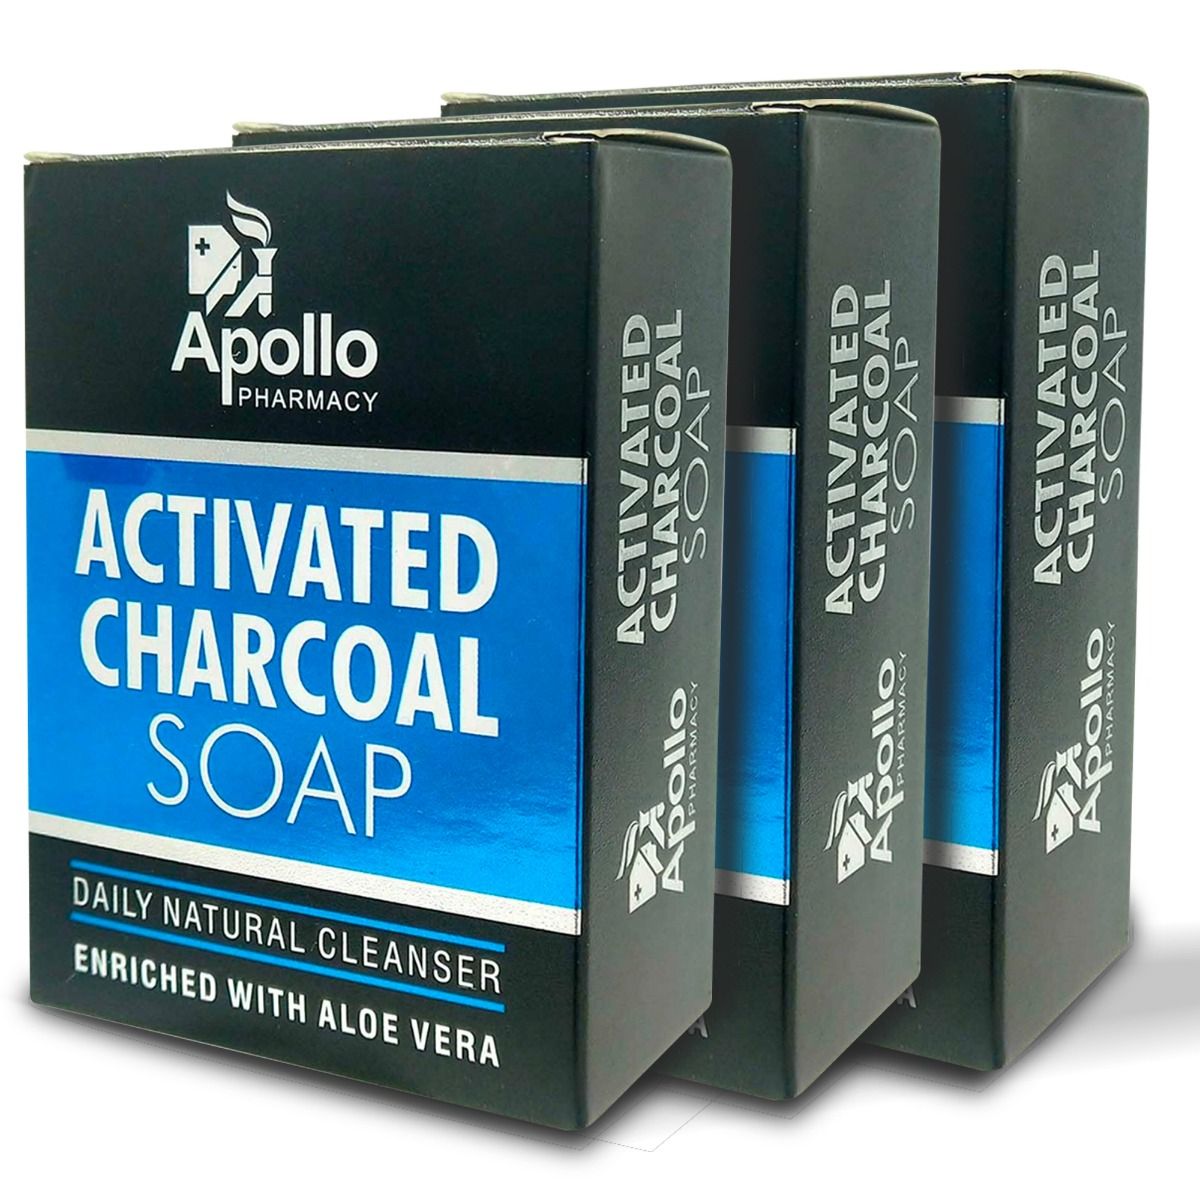 Buy Apollo Pharmacy Activated Charcoal Soap, 375 gm (3x125 gm) Online